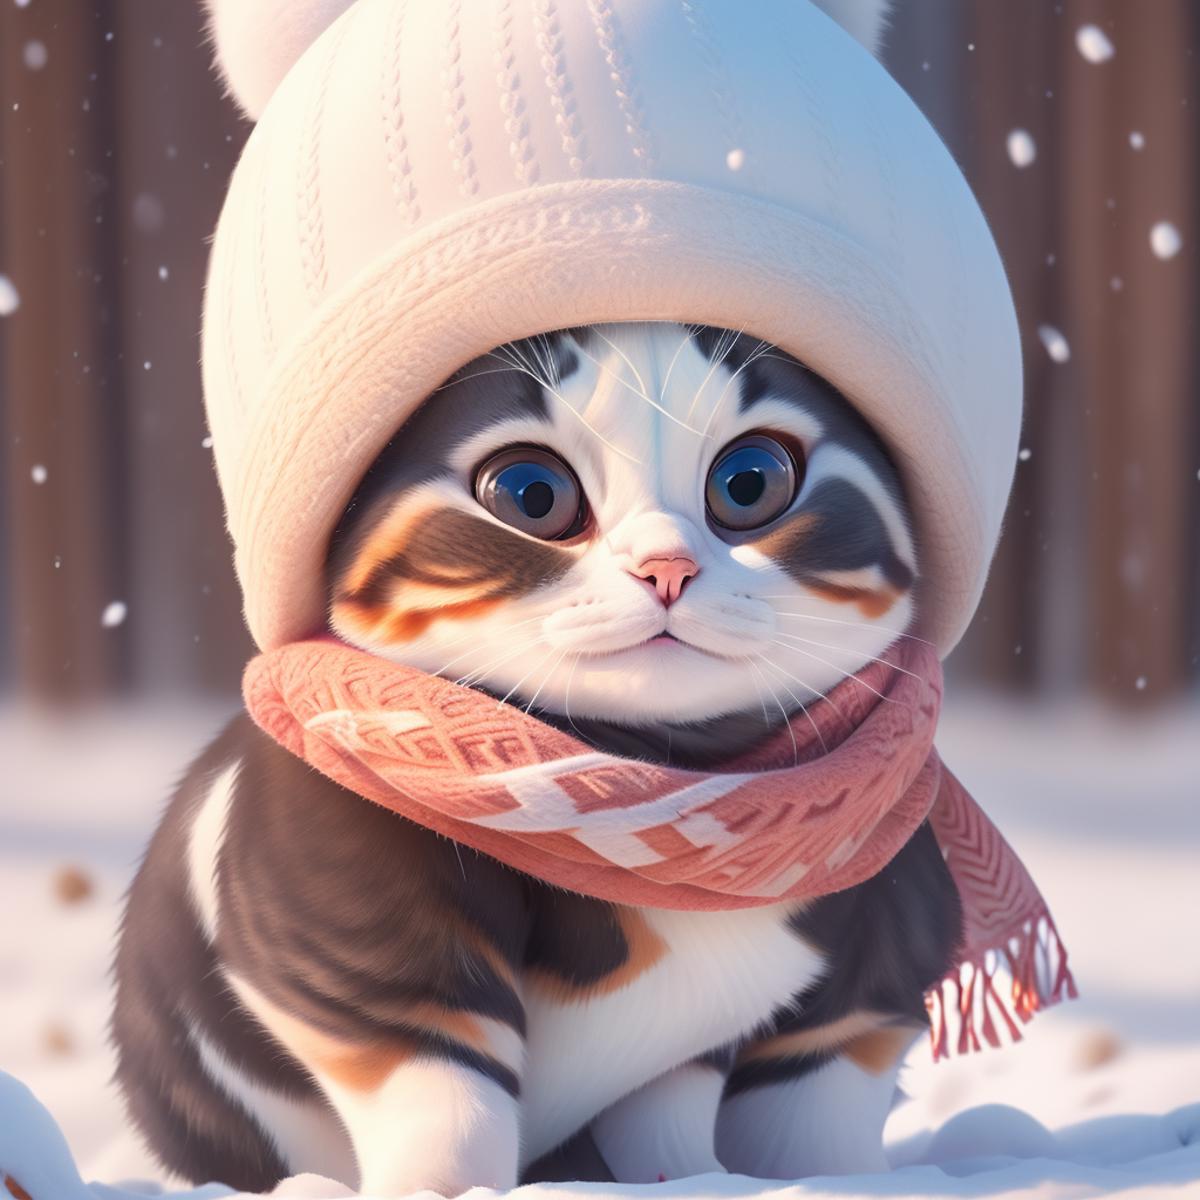 snow baby 动画雪宝宝 image by fengakon